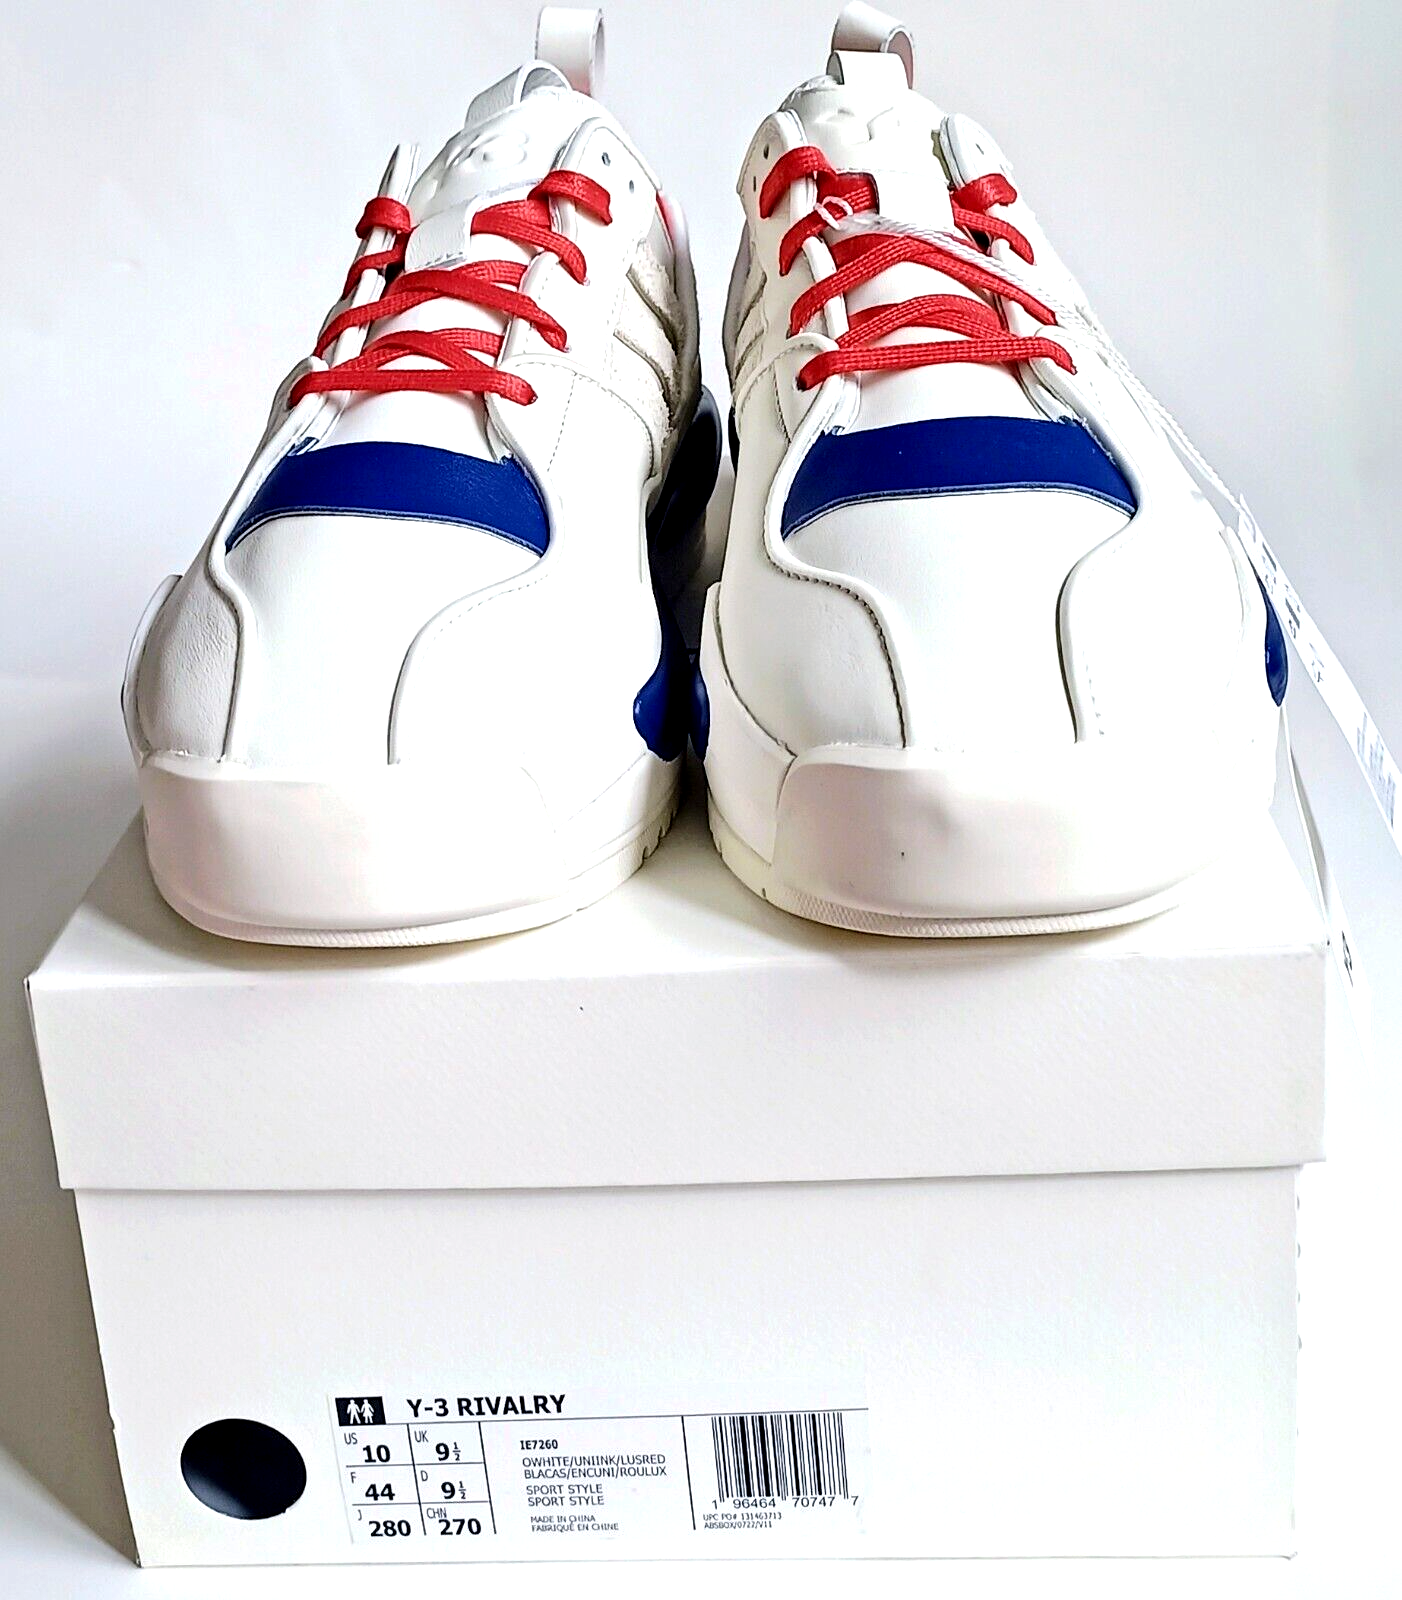 Pre-owned Adidas Originals Nwb Adidas Y-3 Rivalry Ie7260 Leather Sneaker Off White/ink/red Men Us 10 /uk9.5